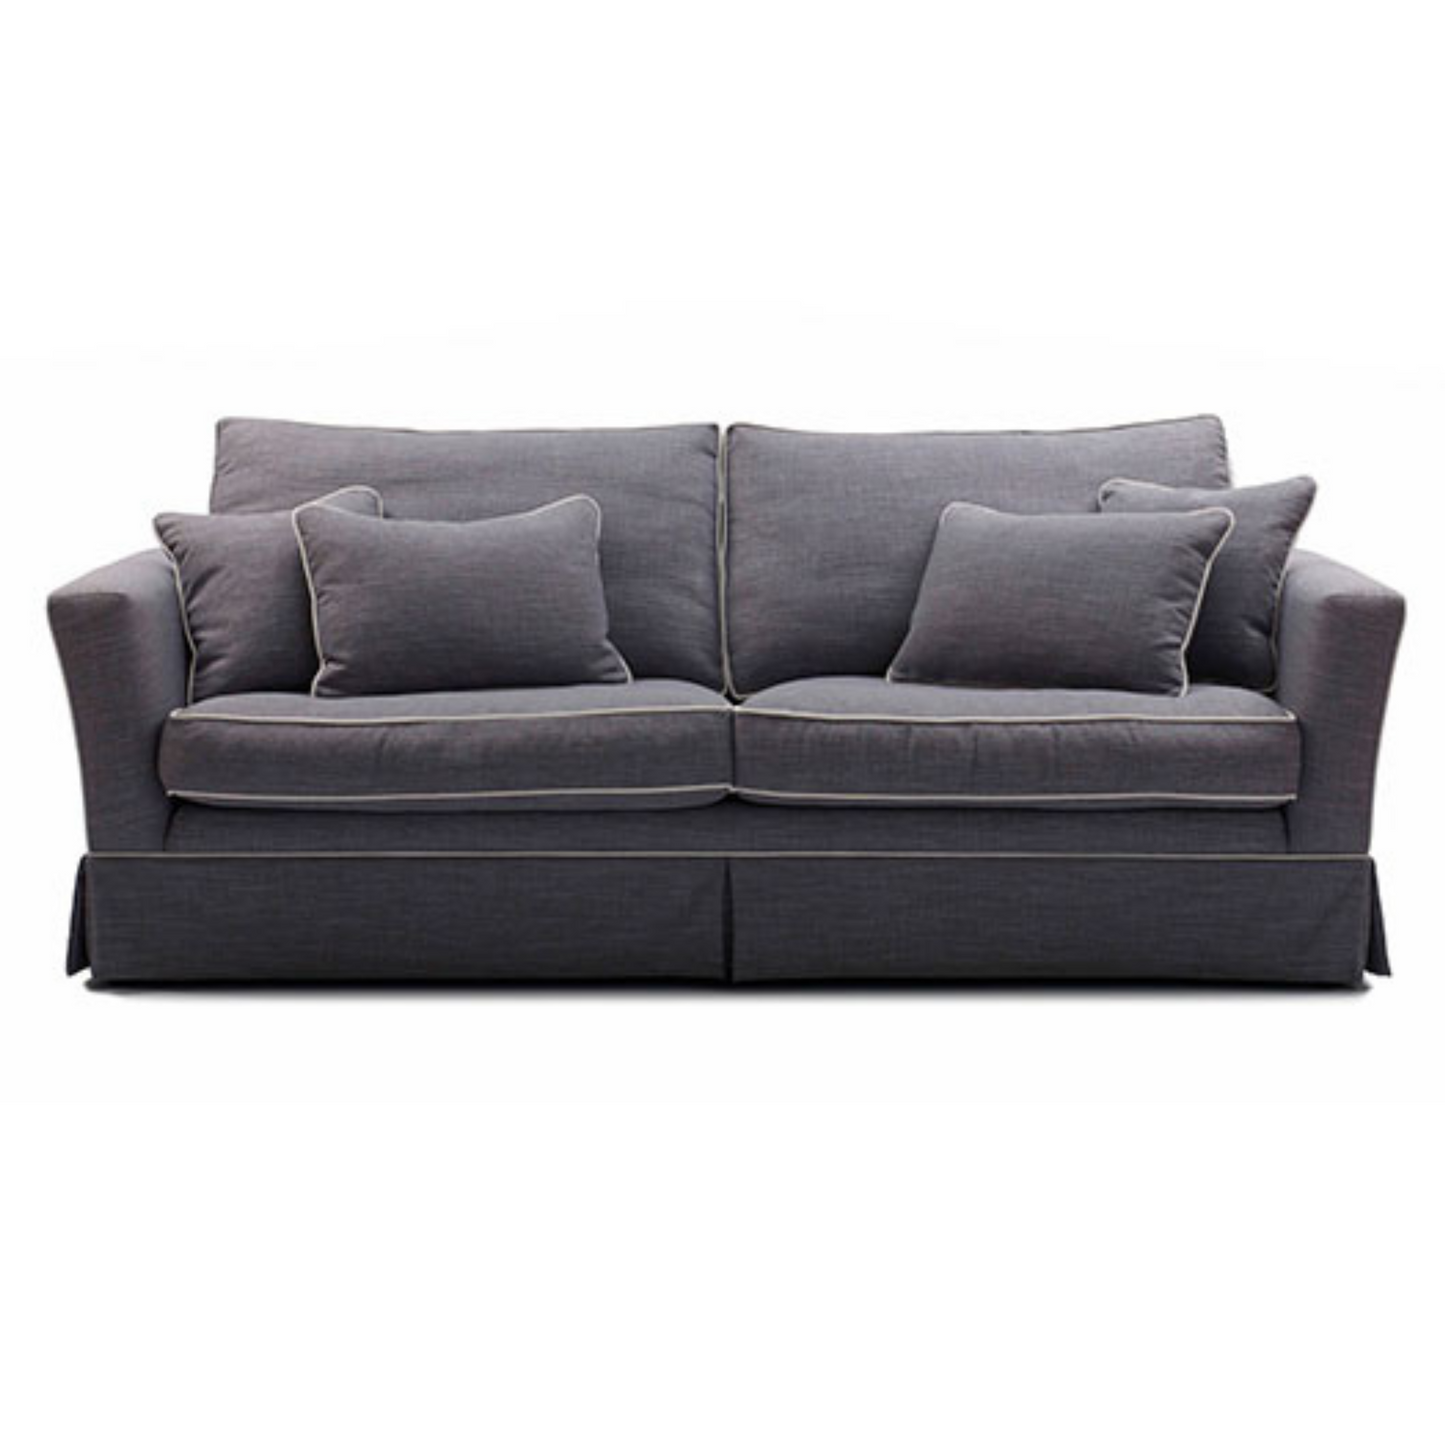 Carter Loose Cover Sofa by Molmic